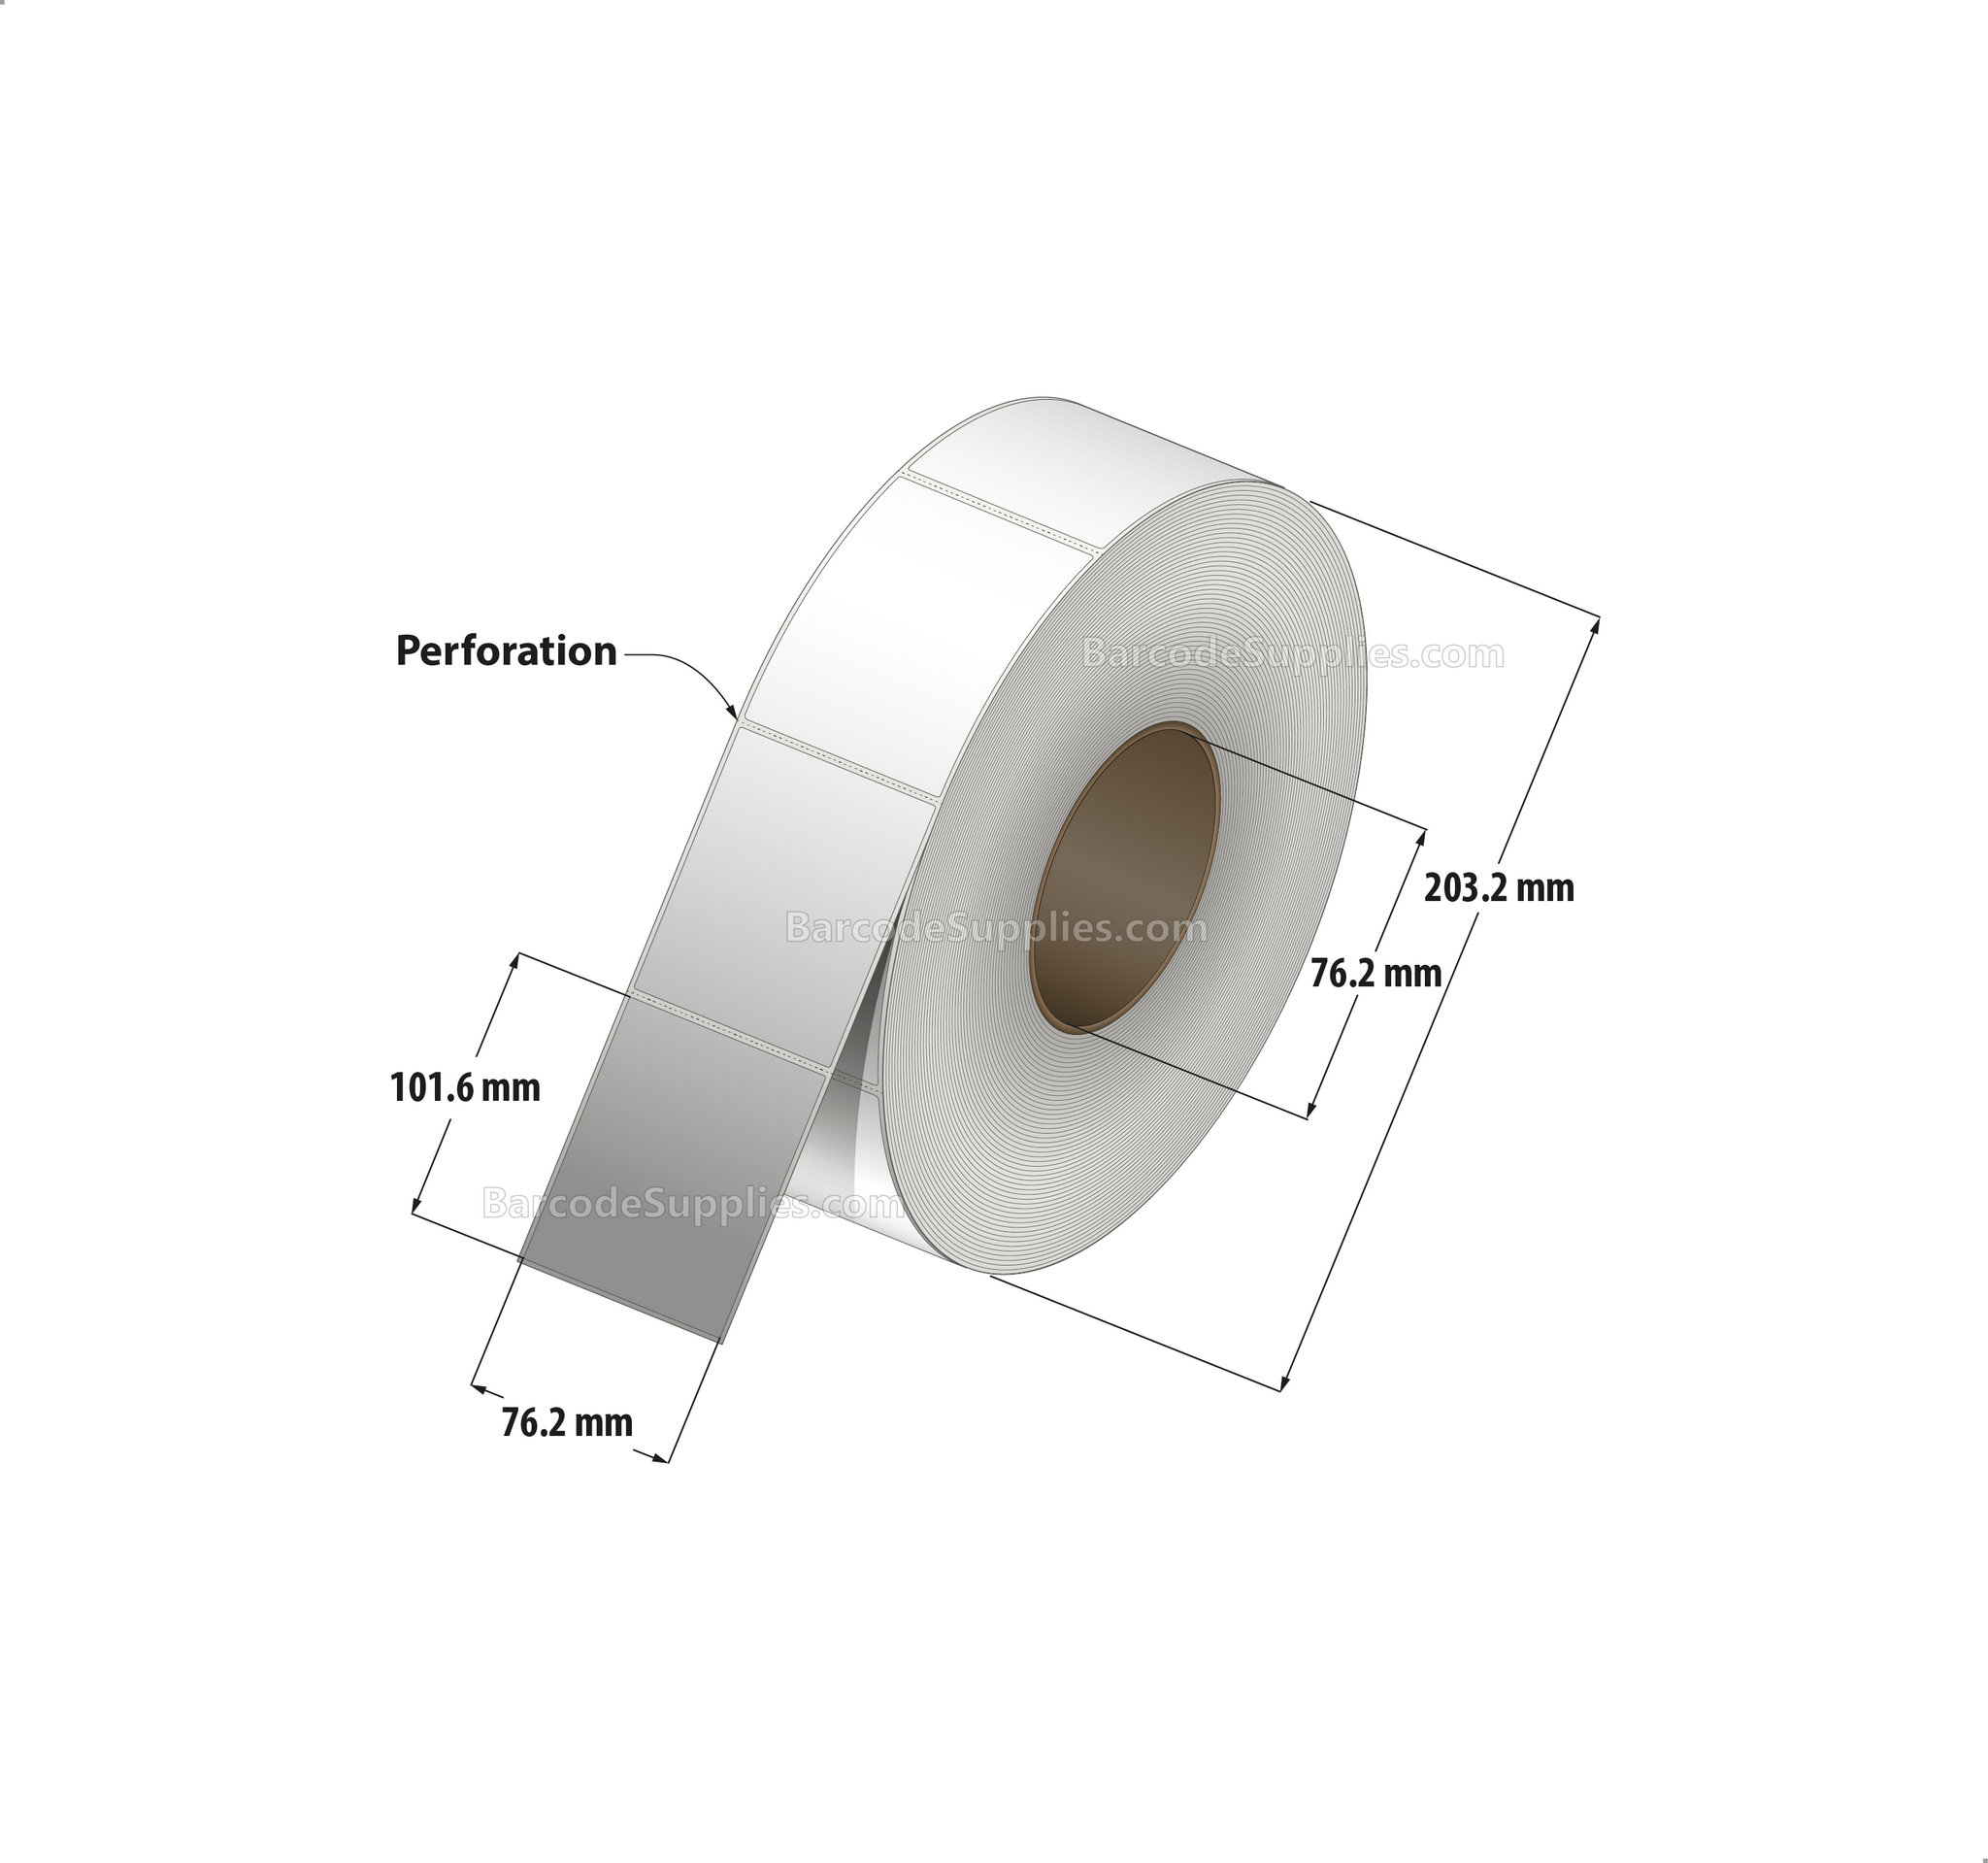 3 x 4 Thermal Transfer White Labels With Permanent Acrylic Adhesive - Perforated - 1500 Labels Per Roll - Carton Of 8 Rolls - 12000 Labels Total - MPN: TH34-1P